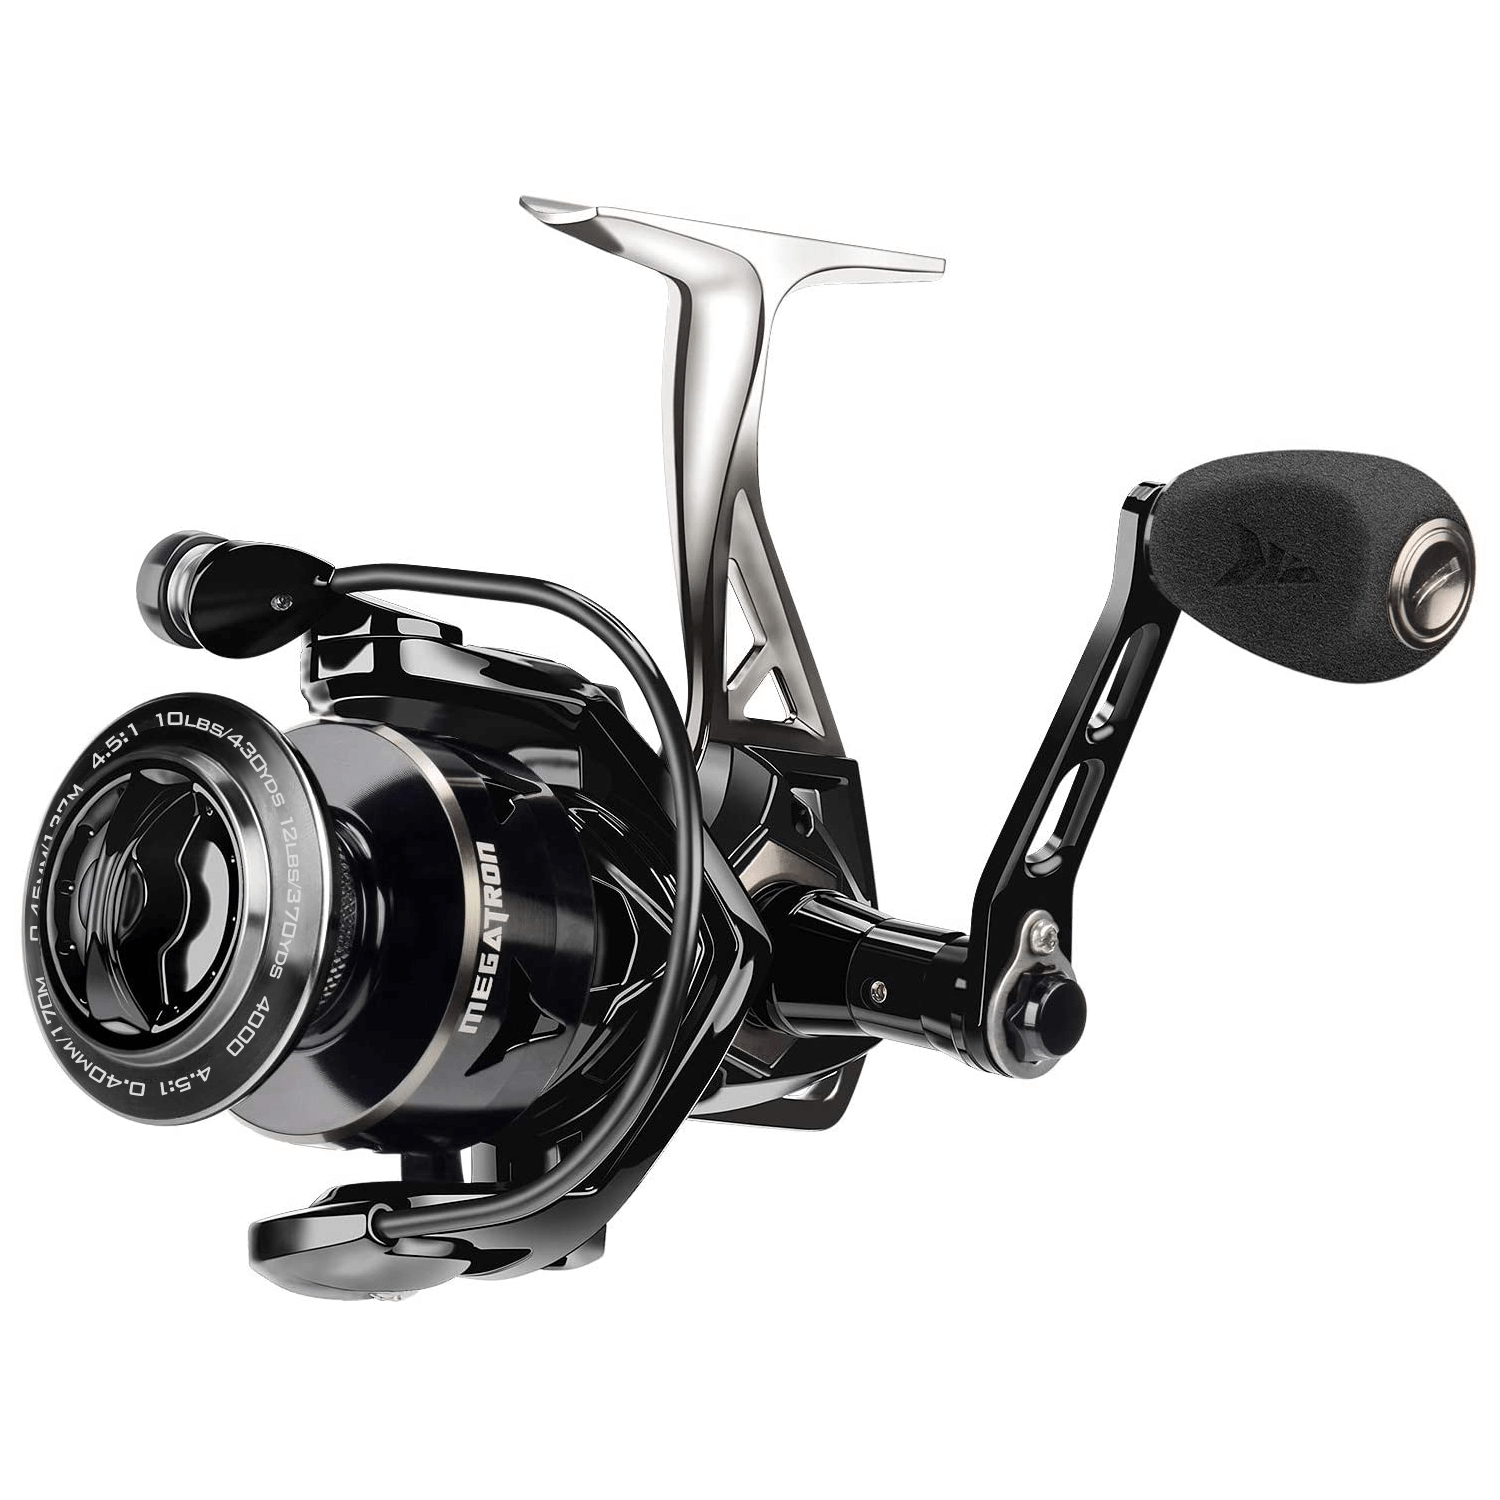 Saltwater Kastking Zephyr Spinning Reel With Long S Blade And 30KG